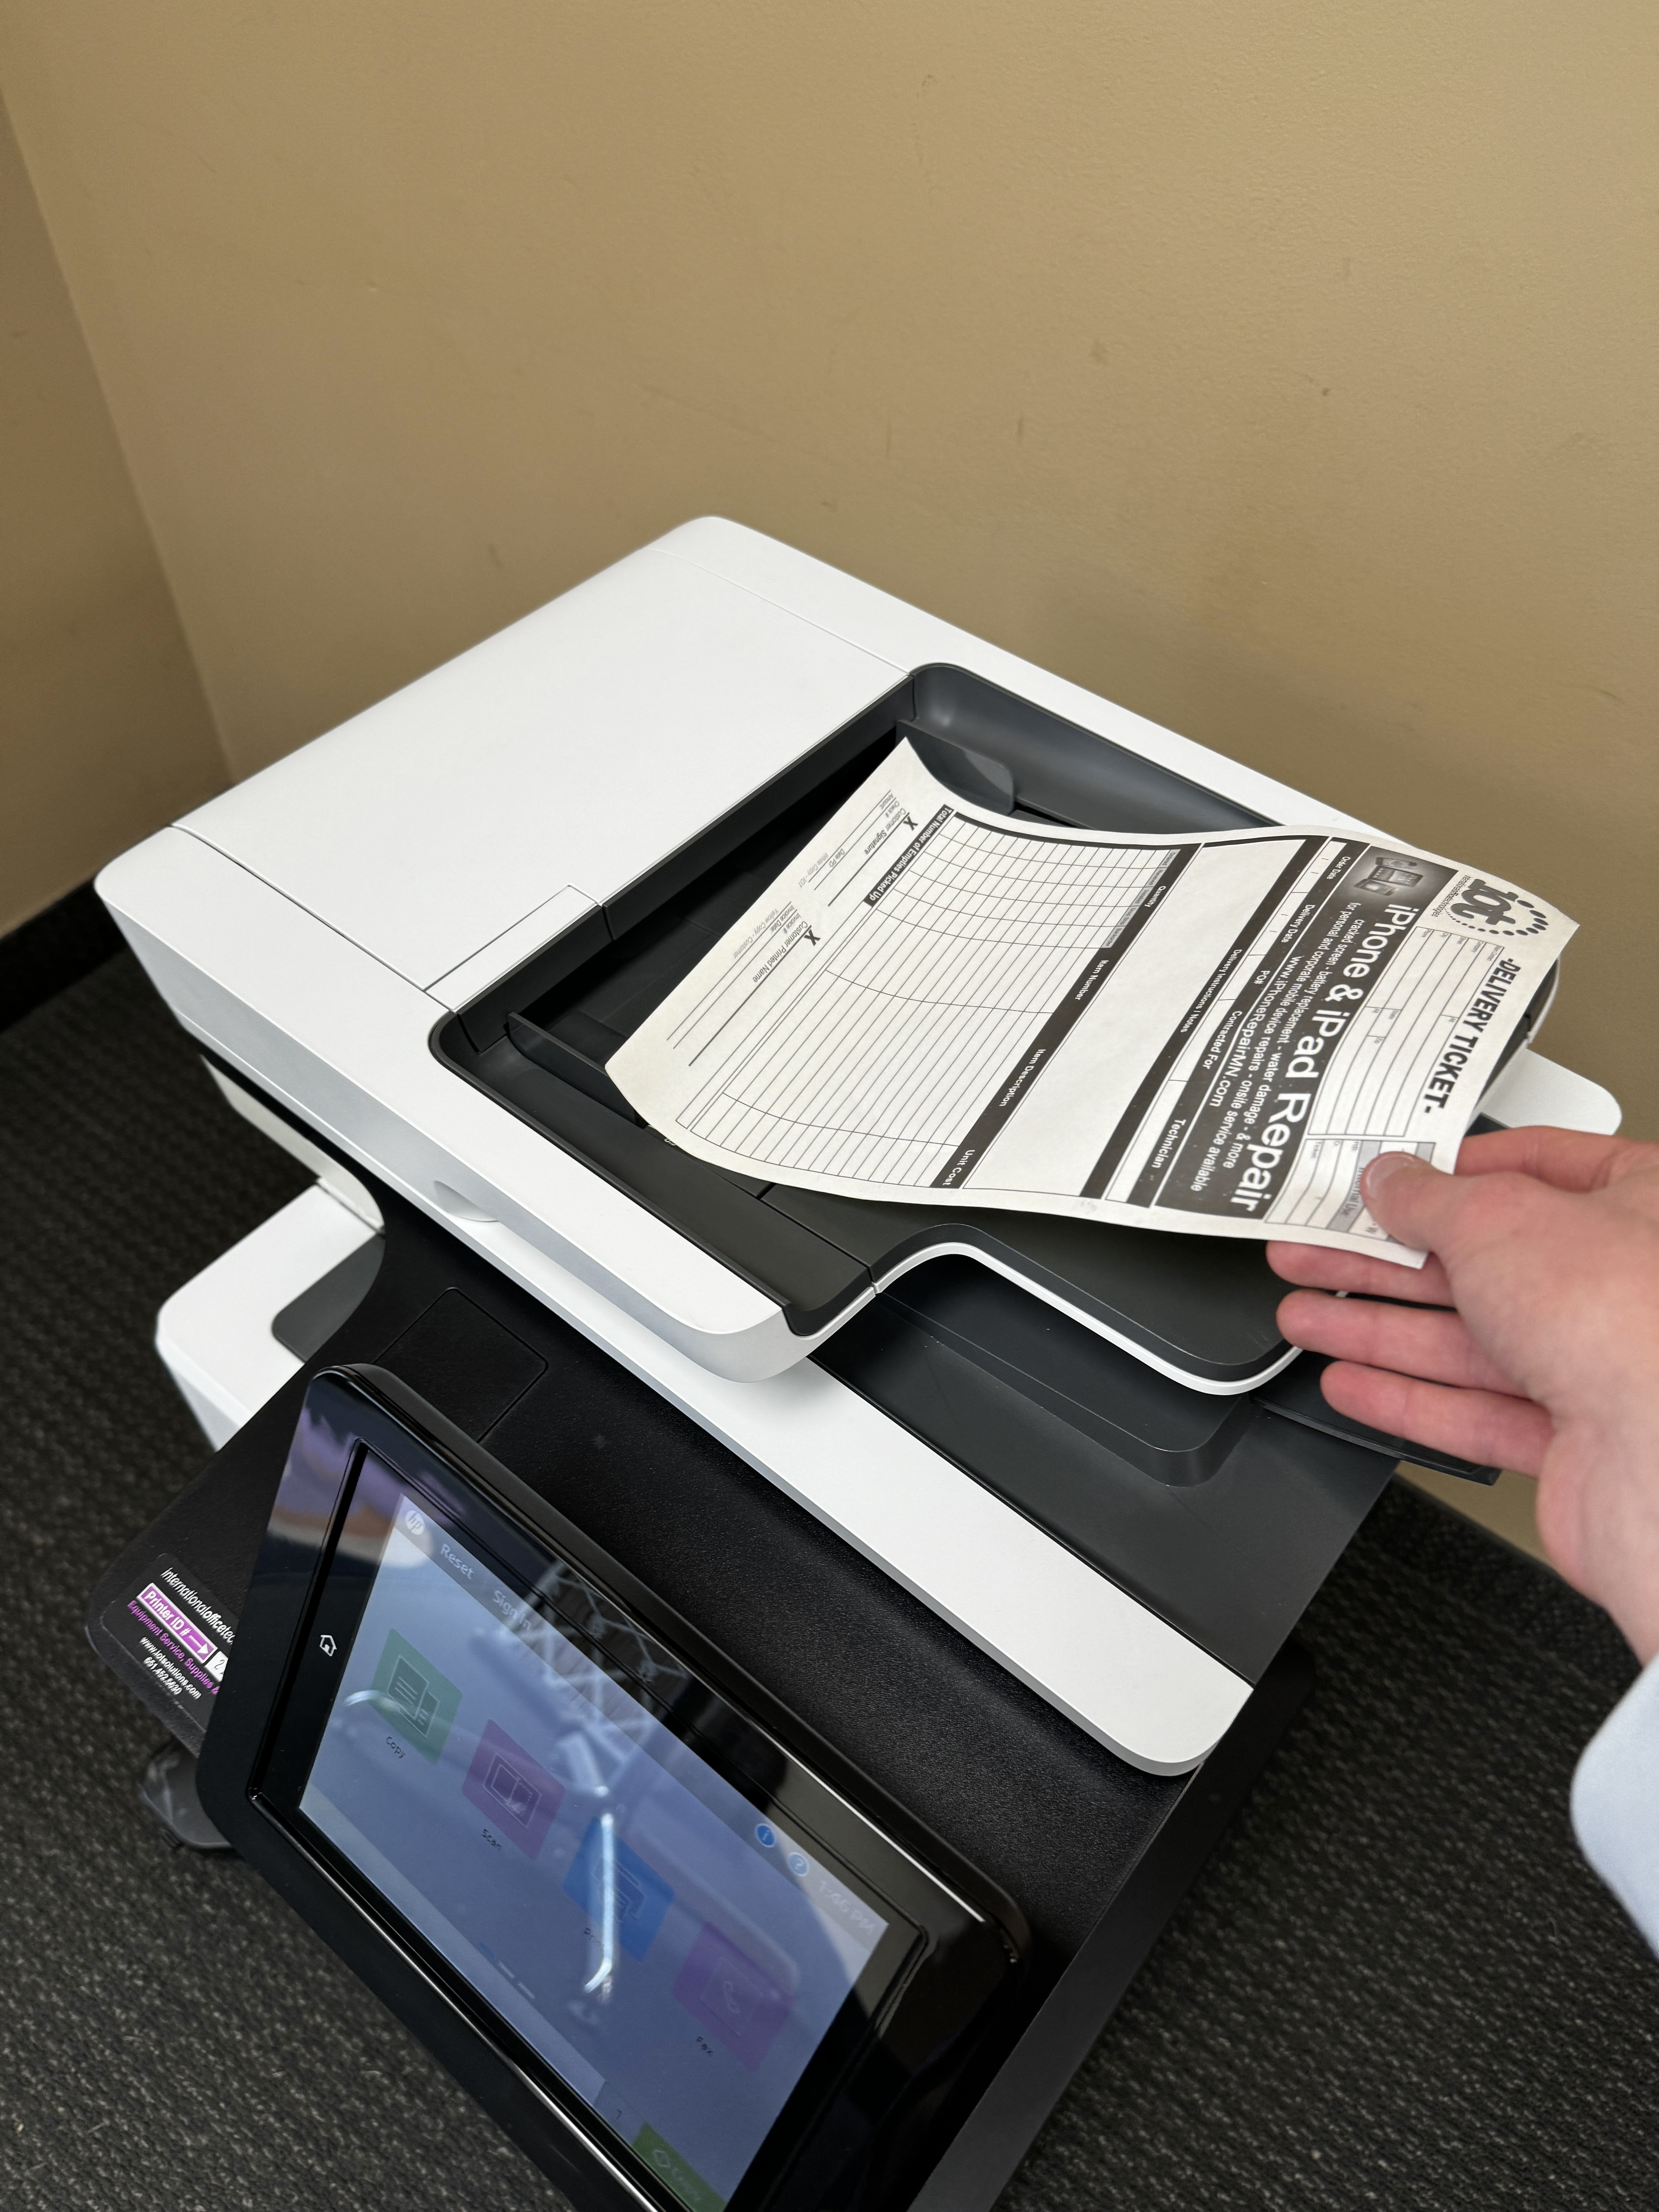 ADF for a HP m527 black and white copier. 